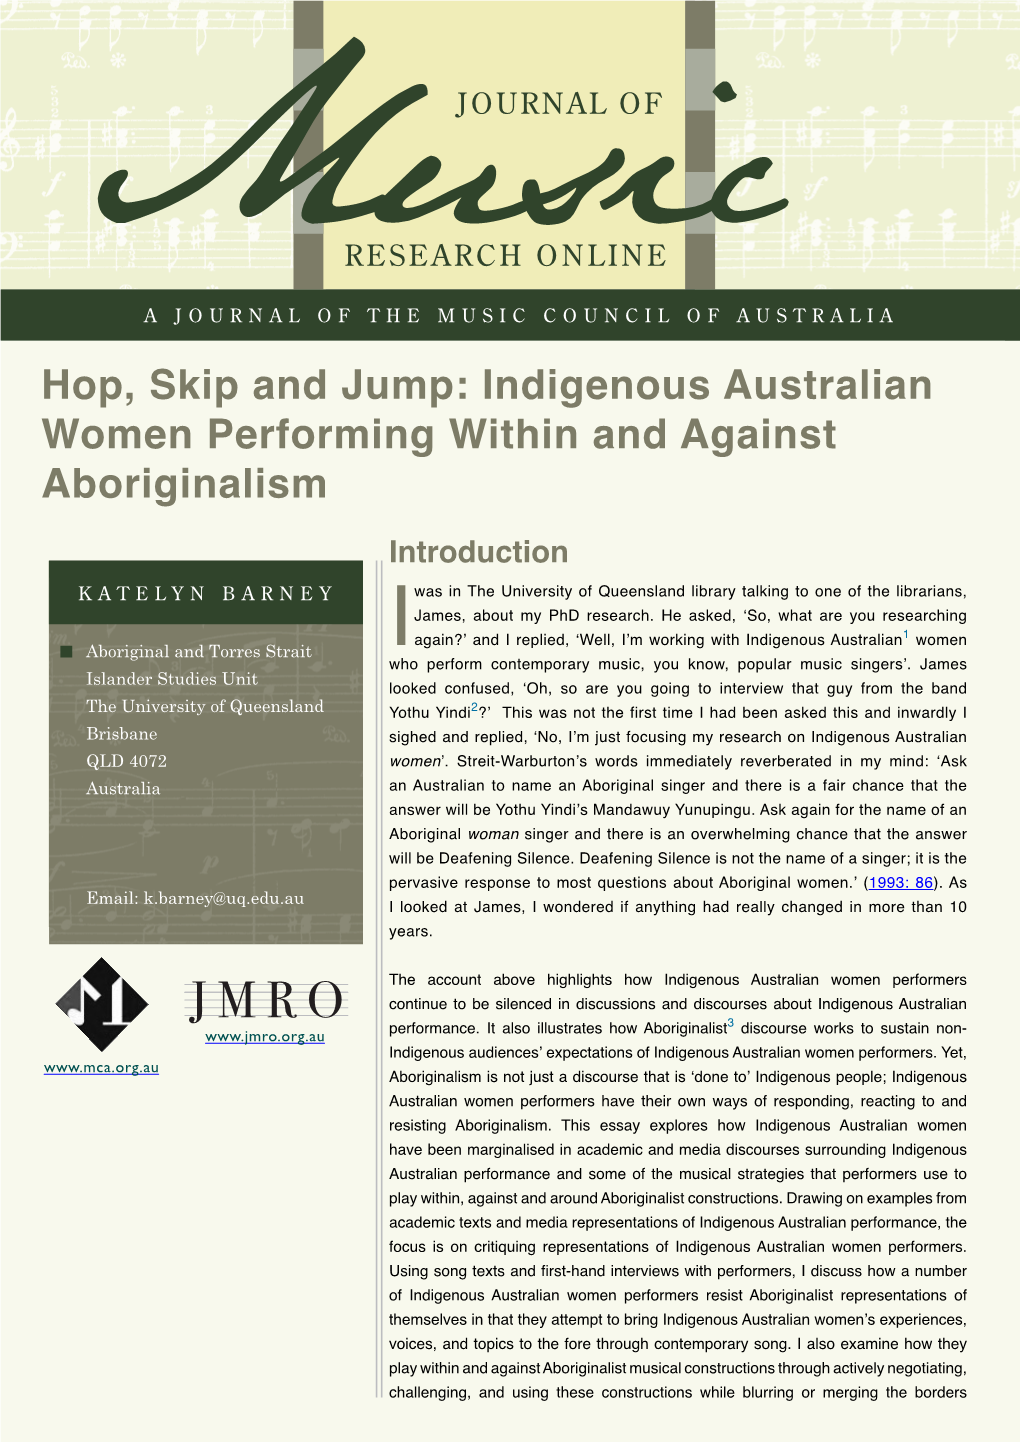 Hop, Skip and Jump: Indigenous Australian Women Performing Within and Against Aboriginalism